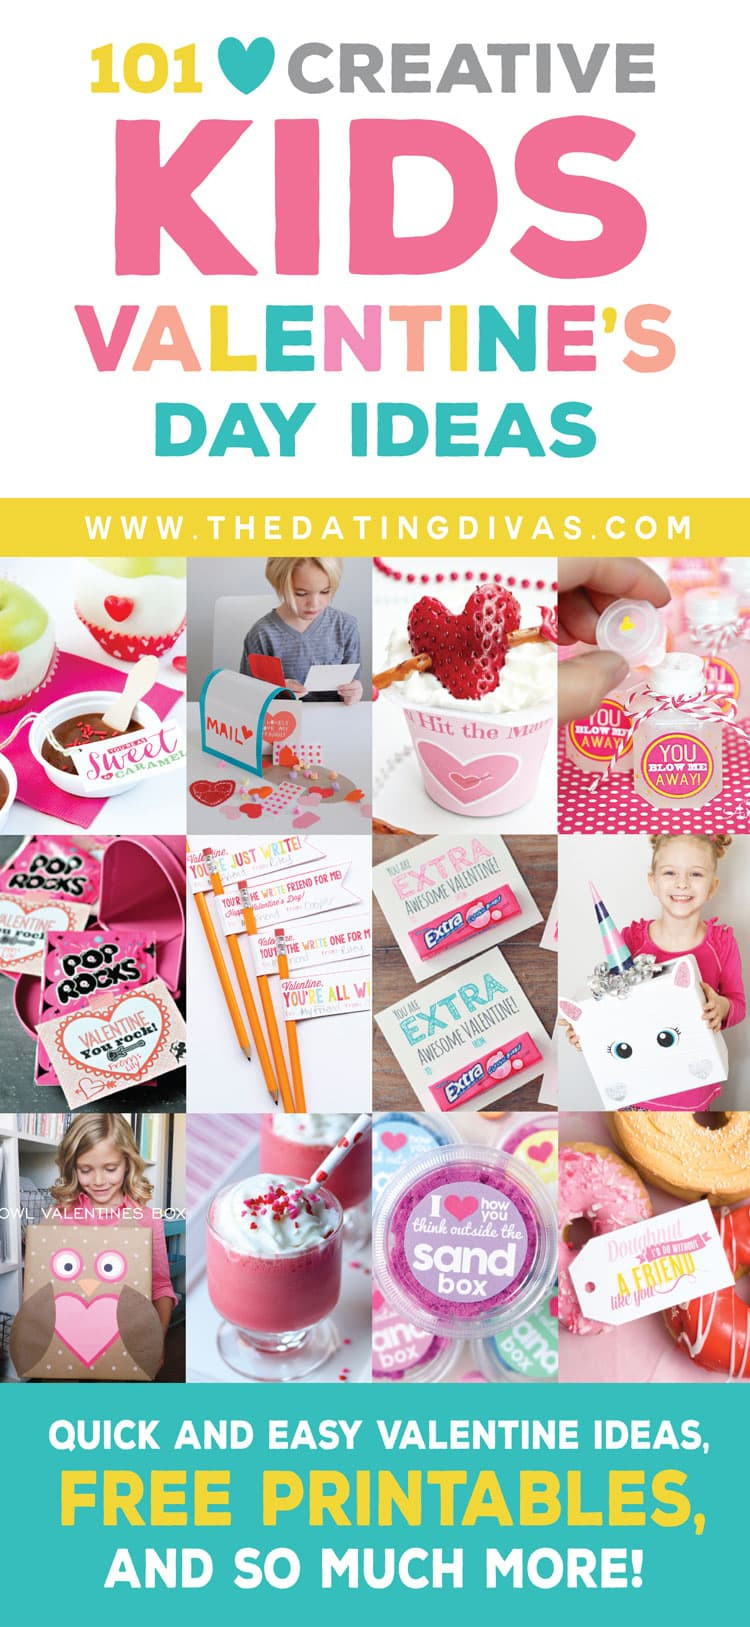 Valentines Gift For Kids
 Kids Valentine s Day Ideas From The Dating Divas